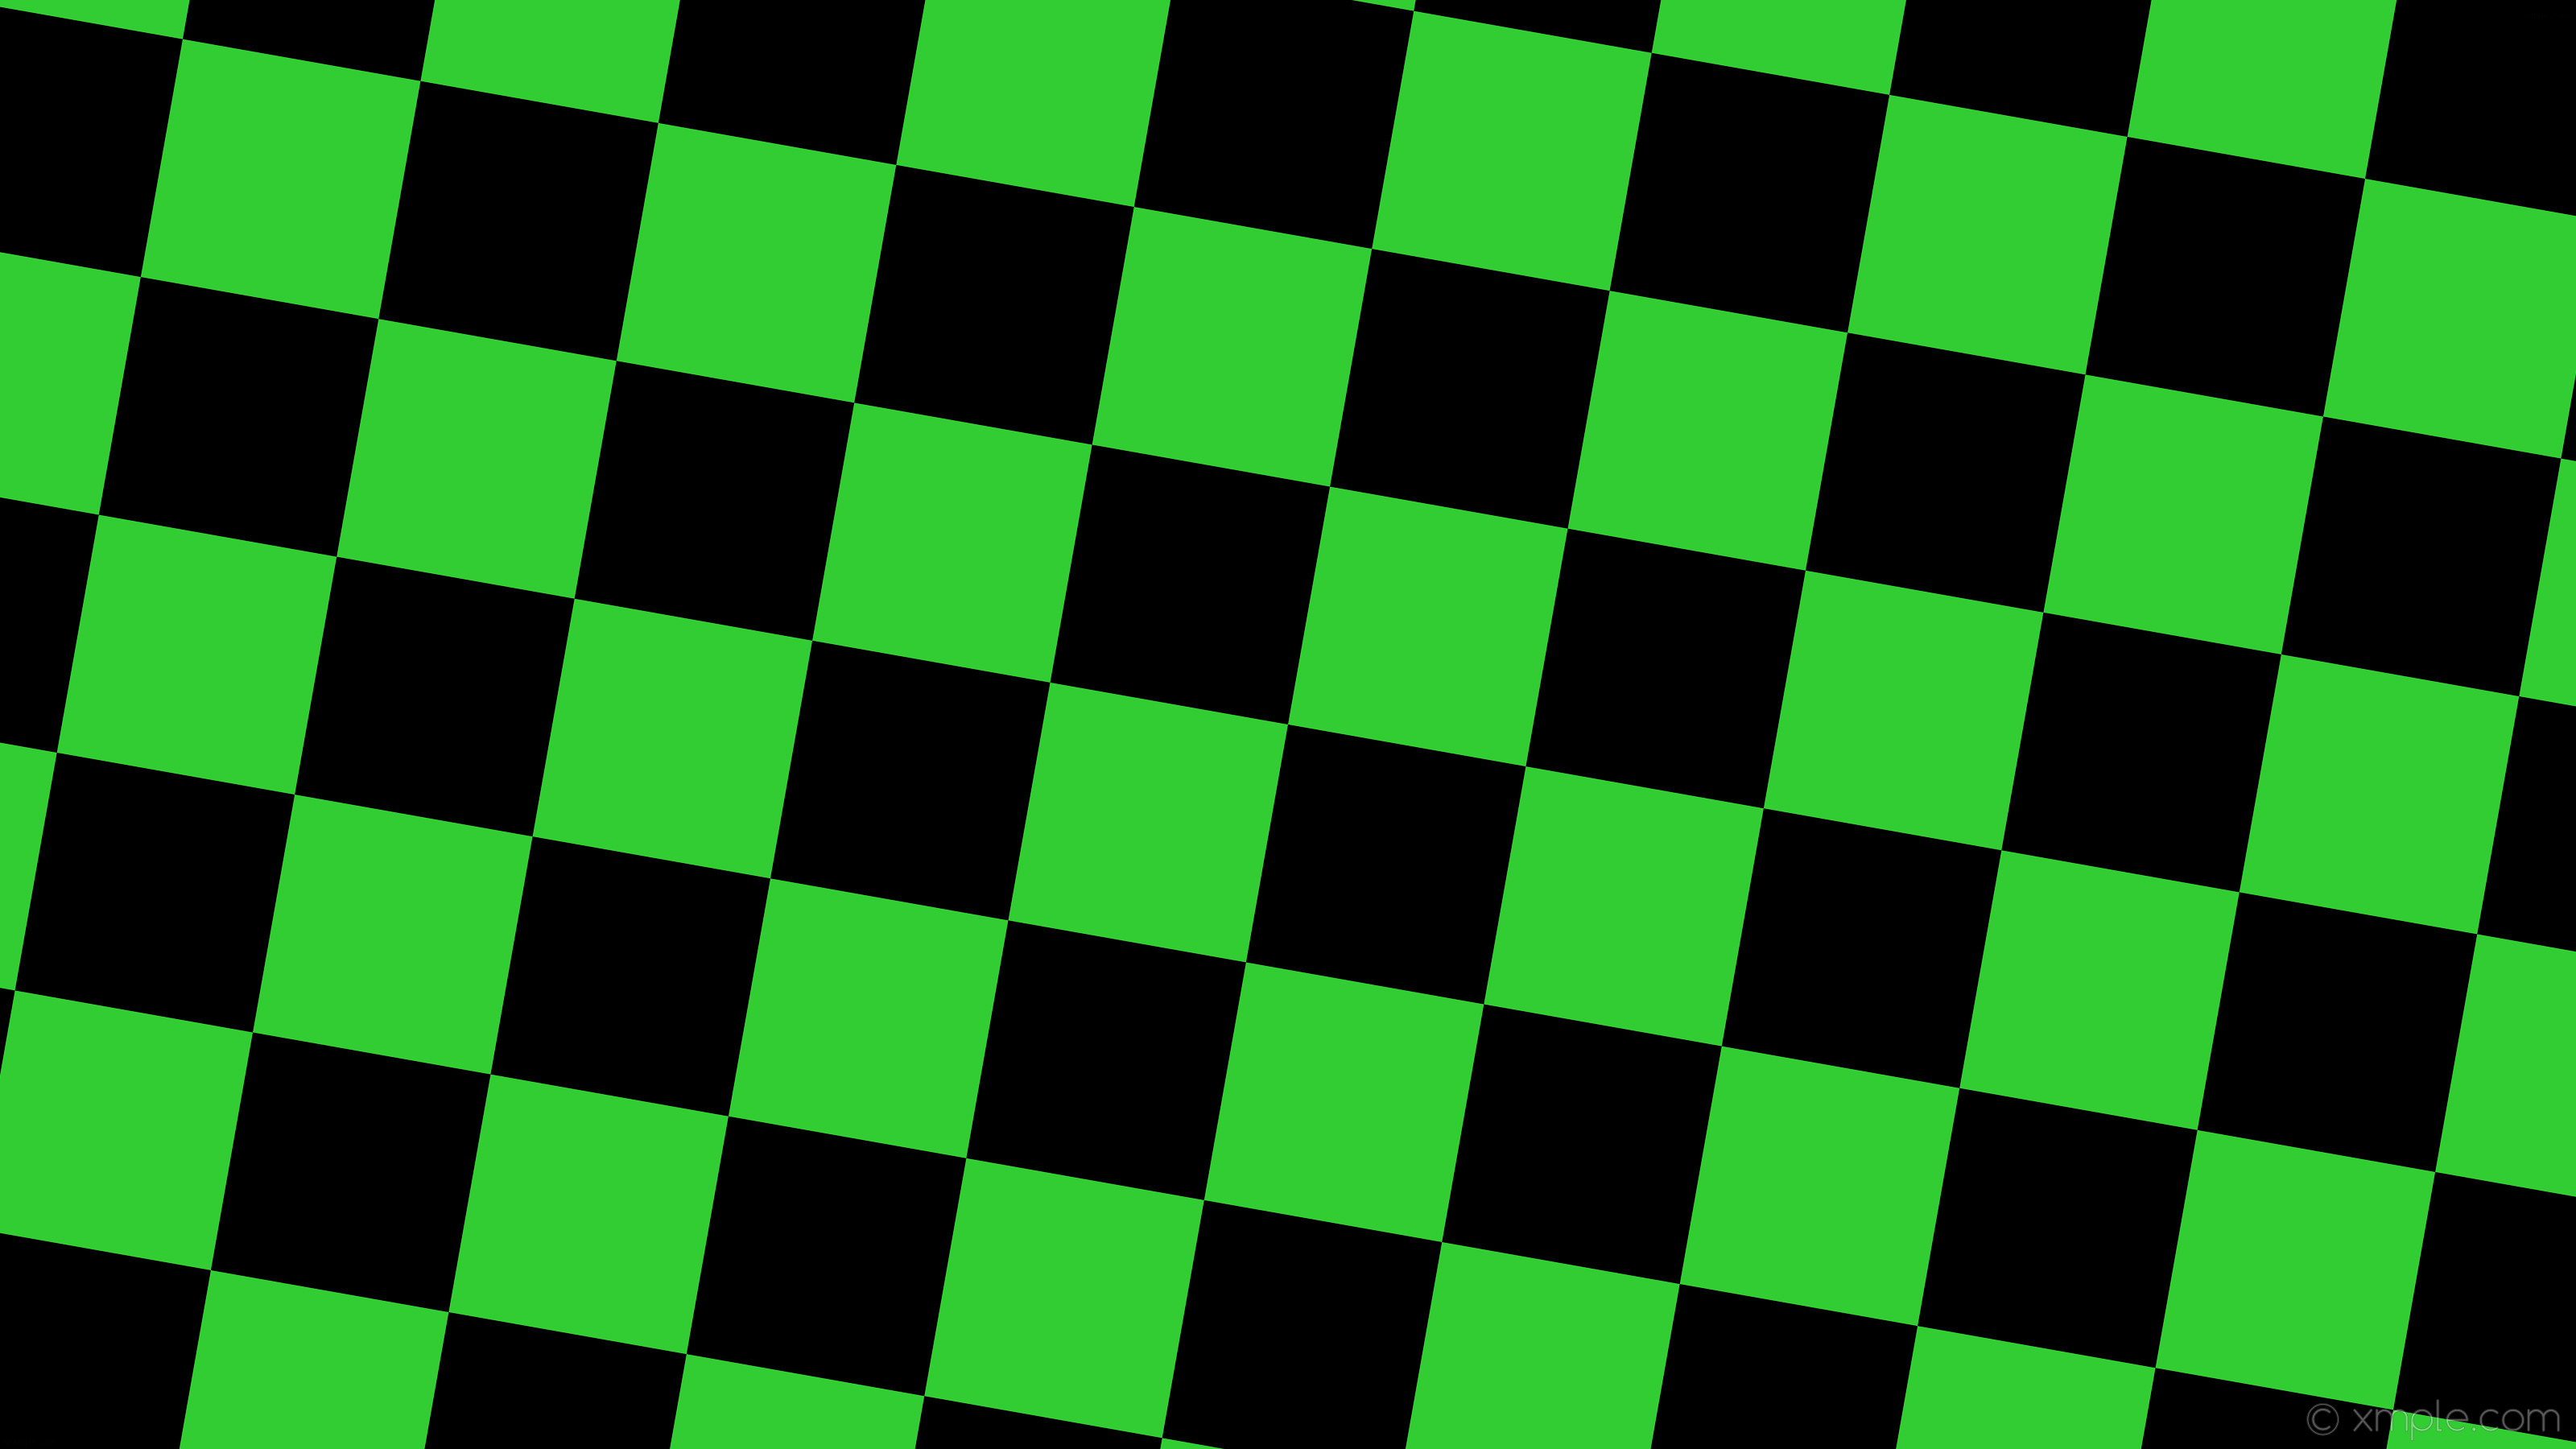 Checkered chequered squares checker pattern checkers background checkerboard seamless tileable<ref> image</ref><box>(5,4),(996,994)</box> 1280x720 - Lime green